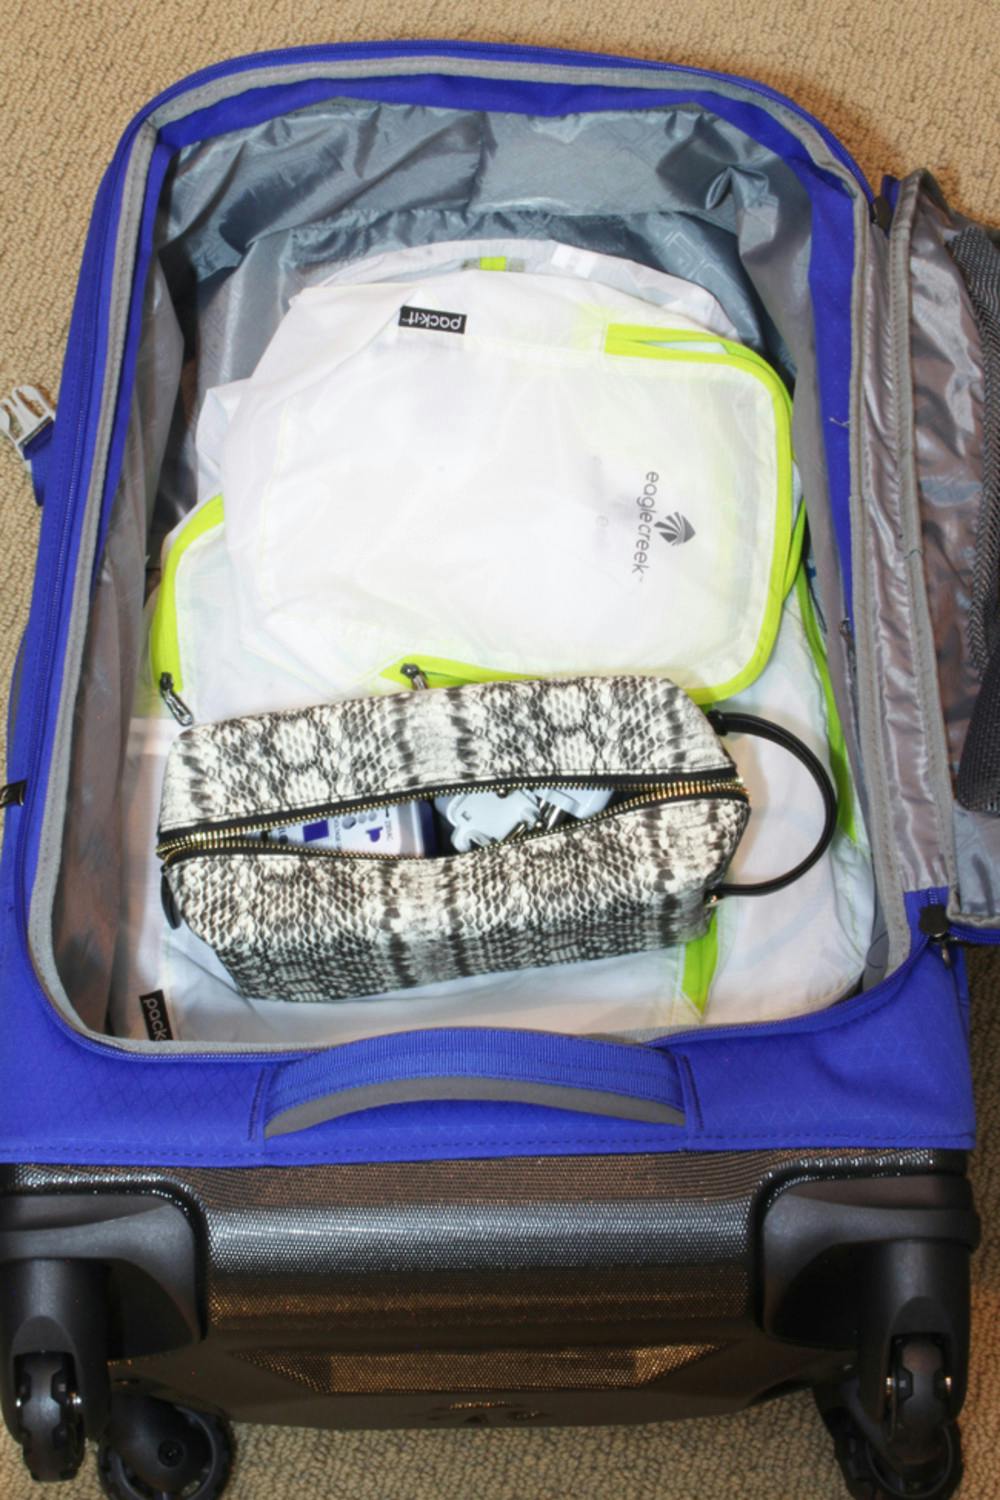 How to Store and Organize Luggage & Travel Gear